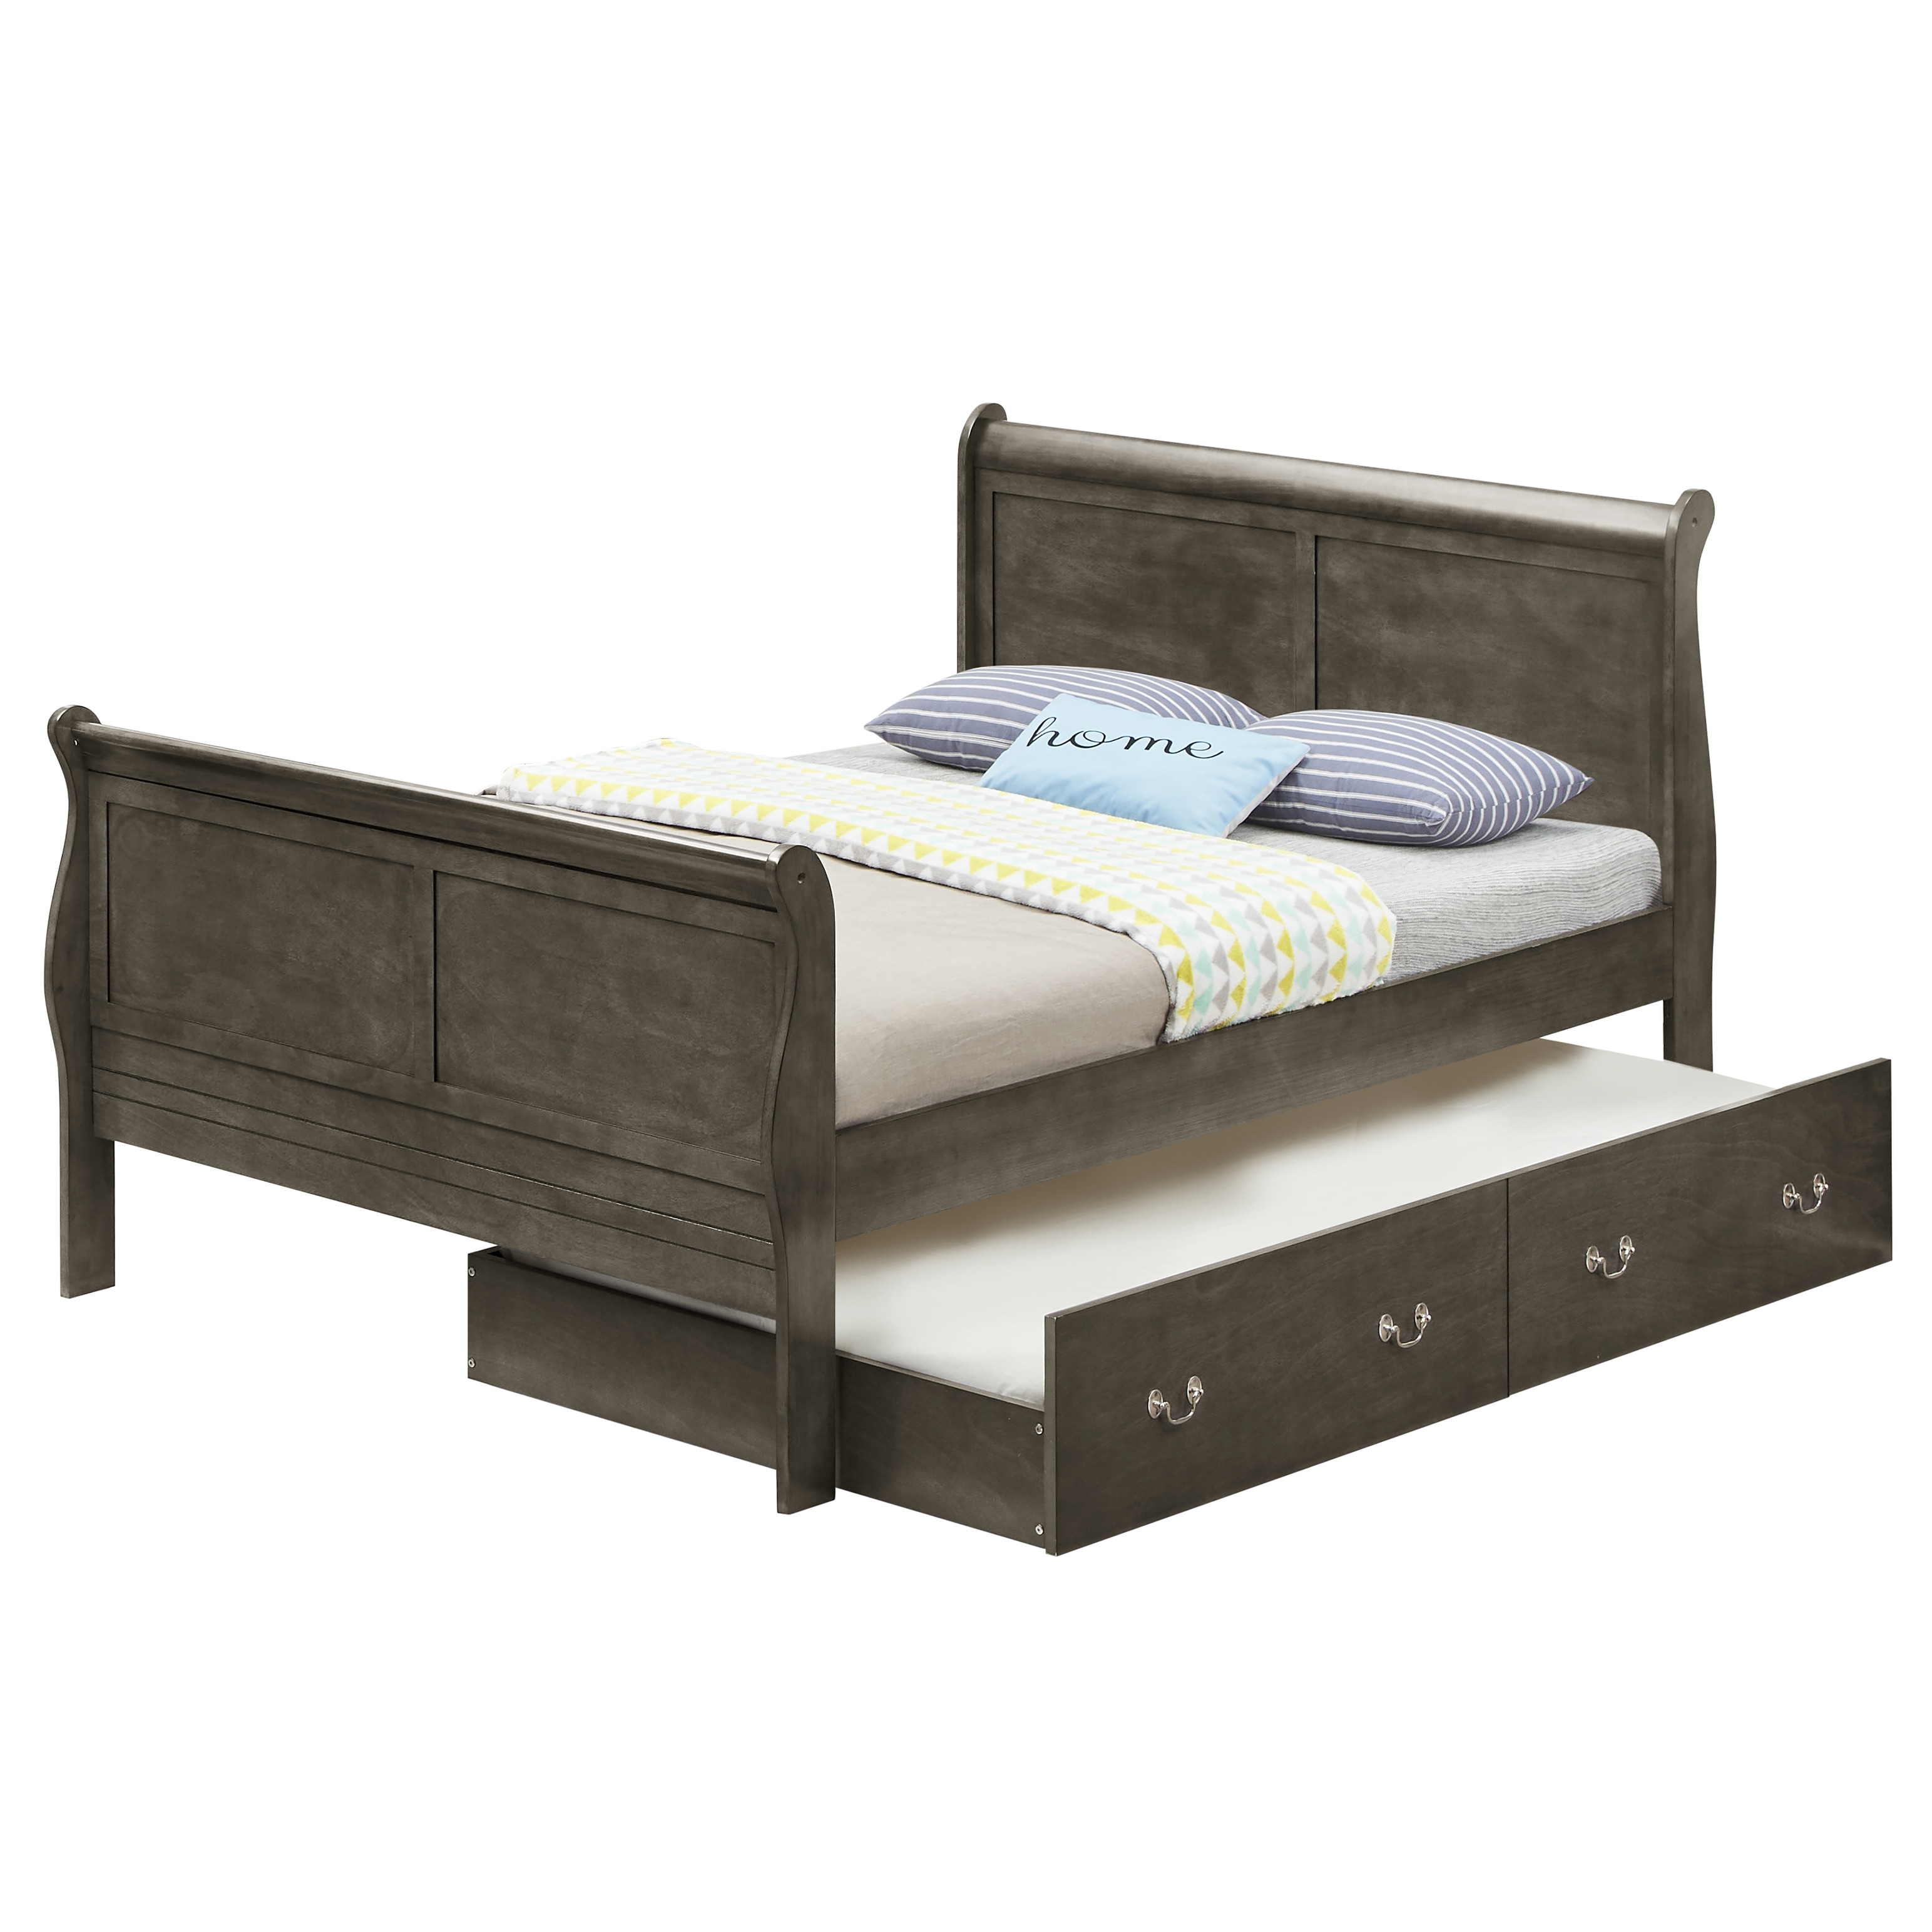 Glory Furniture Louis Phillipe Trundle Bed - On Sale - Bed Bath & Beyond -  36761078